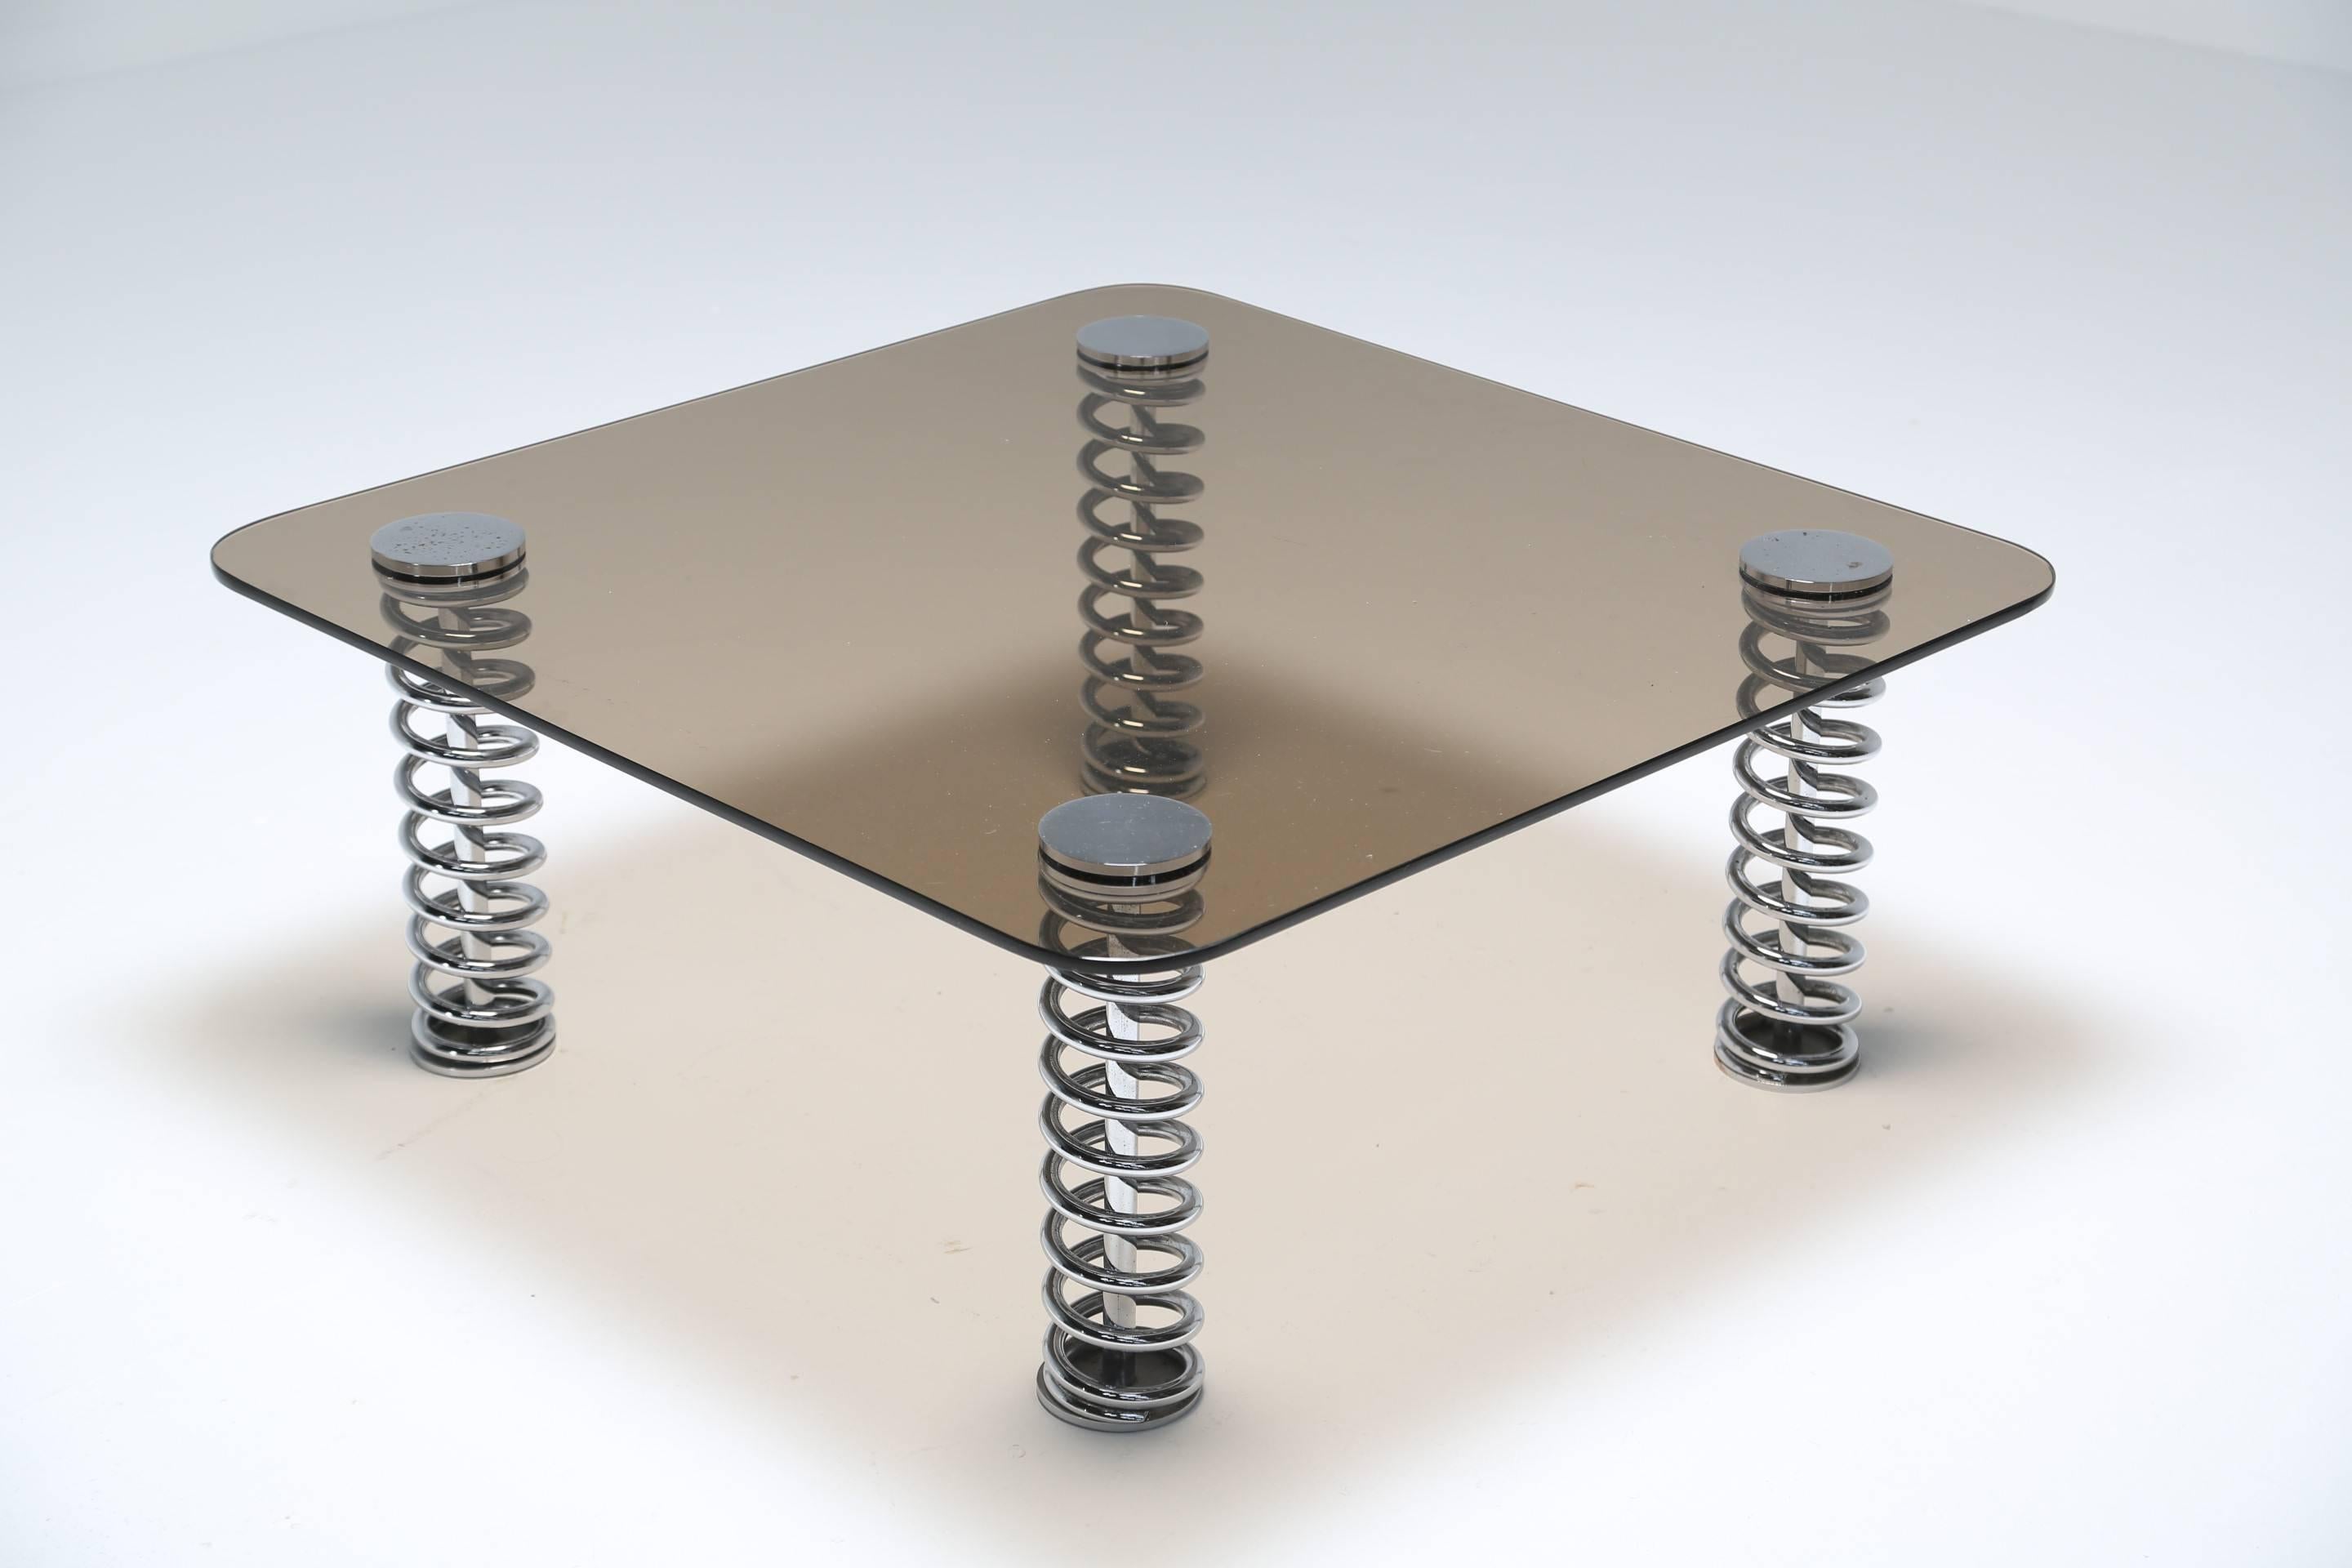 A smoked glass tabletop mounted on four rigid chrome springs. The table is very solid and does not move on the springs. This might make a good piece for a car enthusiast or in a man cave. Unknown maker but possibly British.